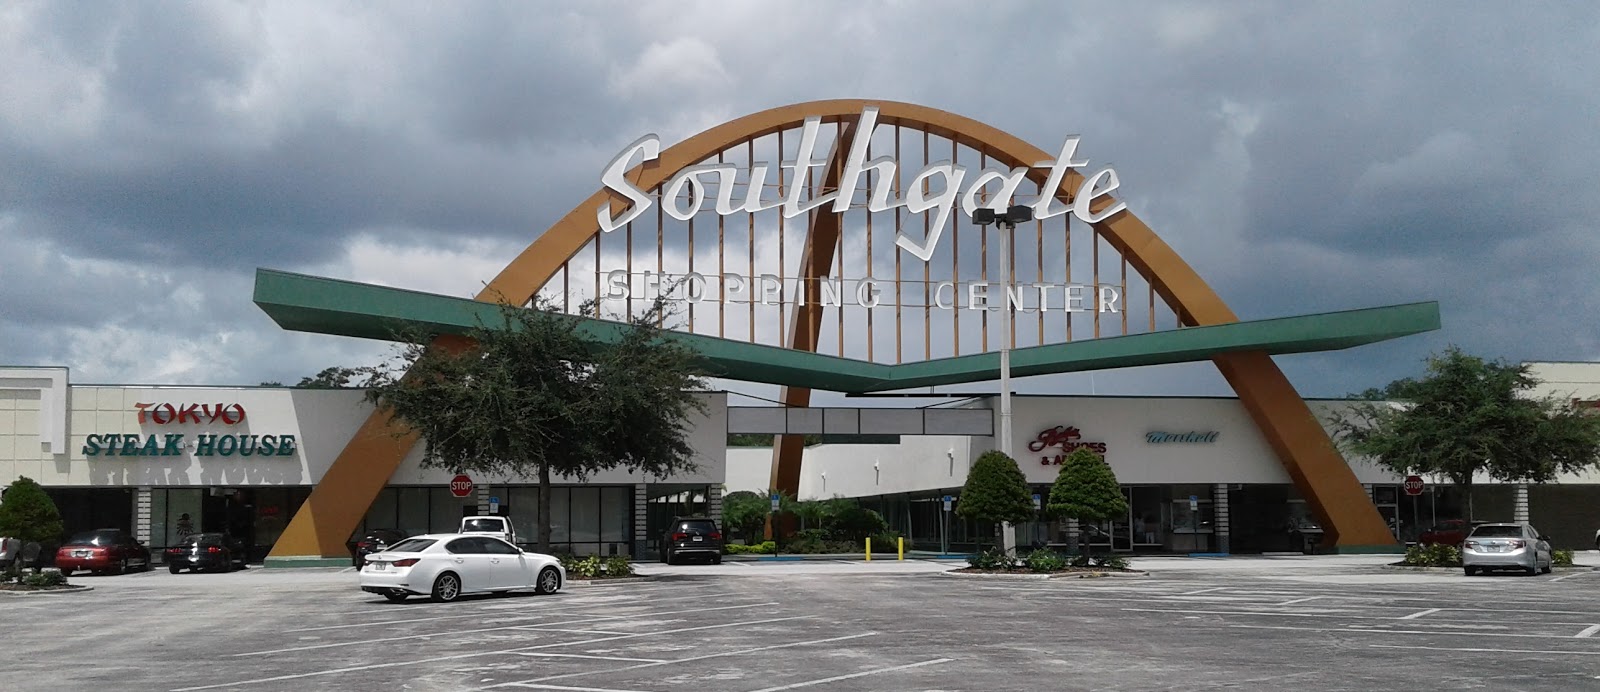 Lakeland's iconic Southgate Shopping Center is fully reopening with new  features - LALtoday